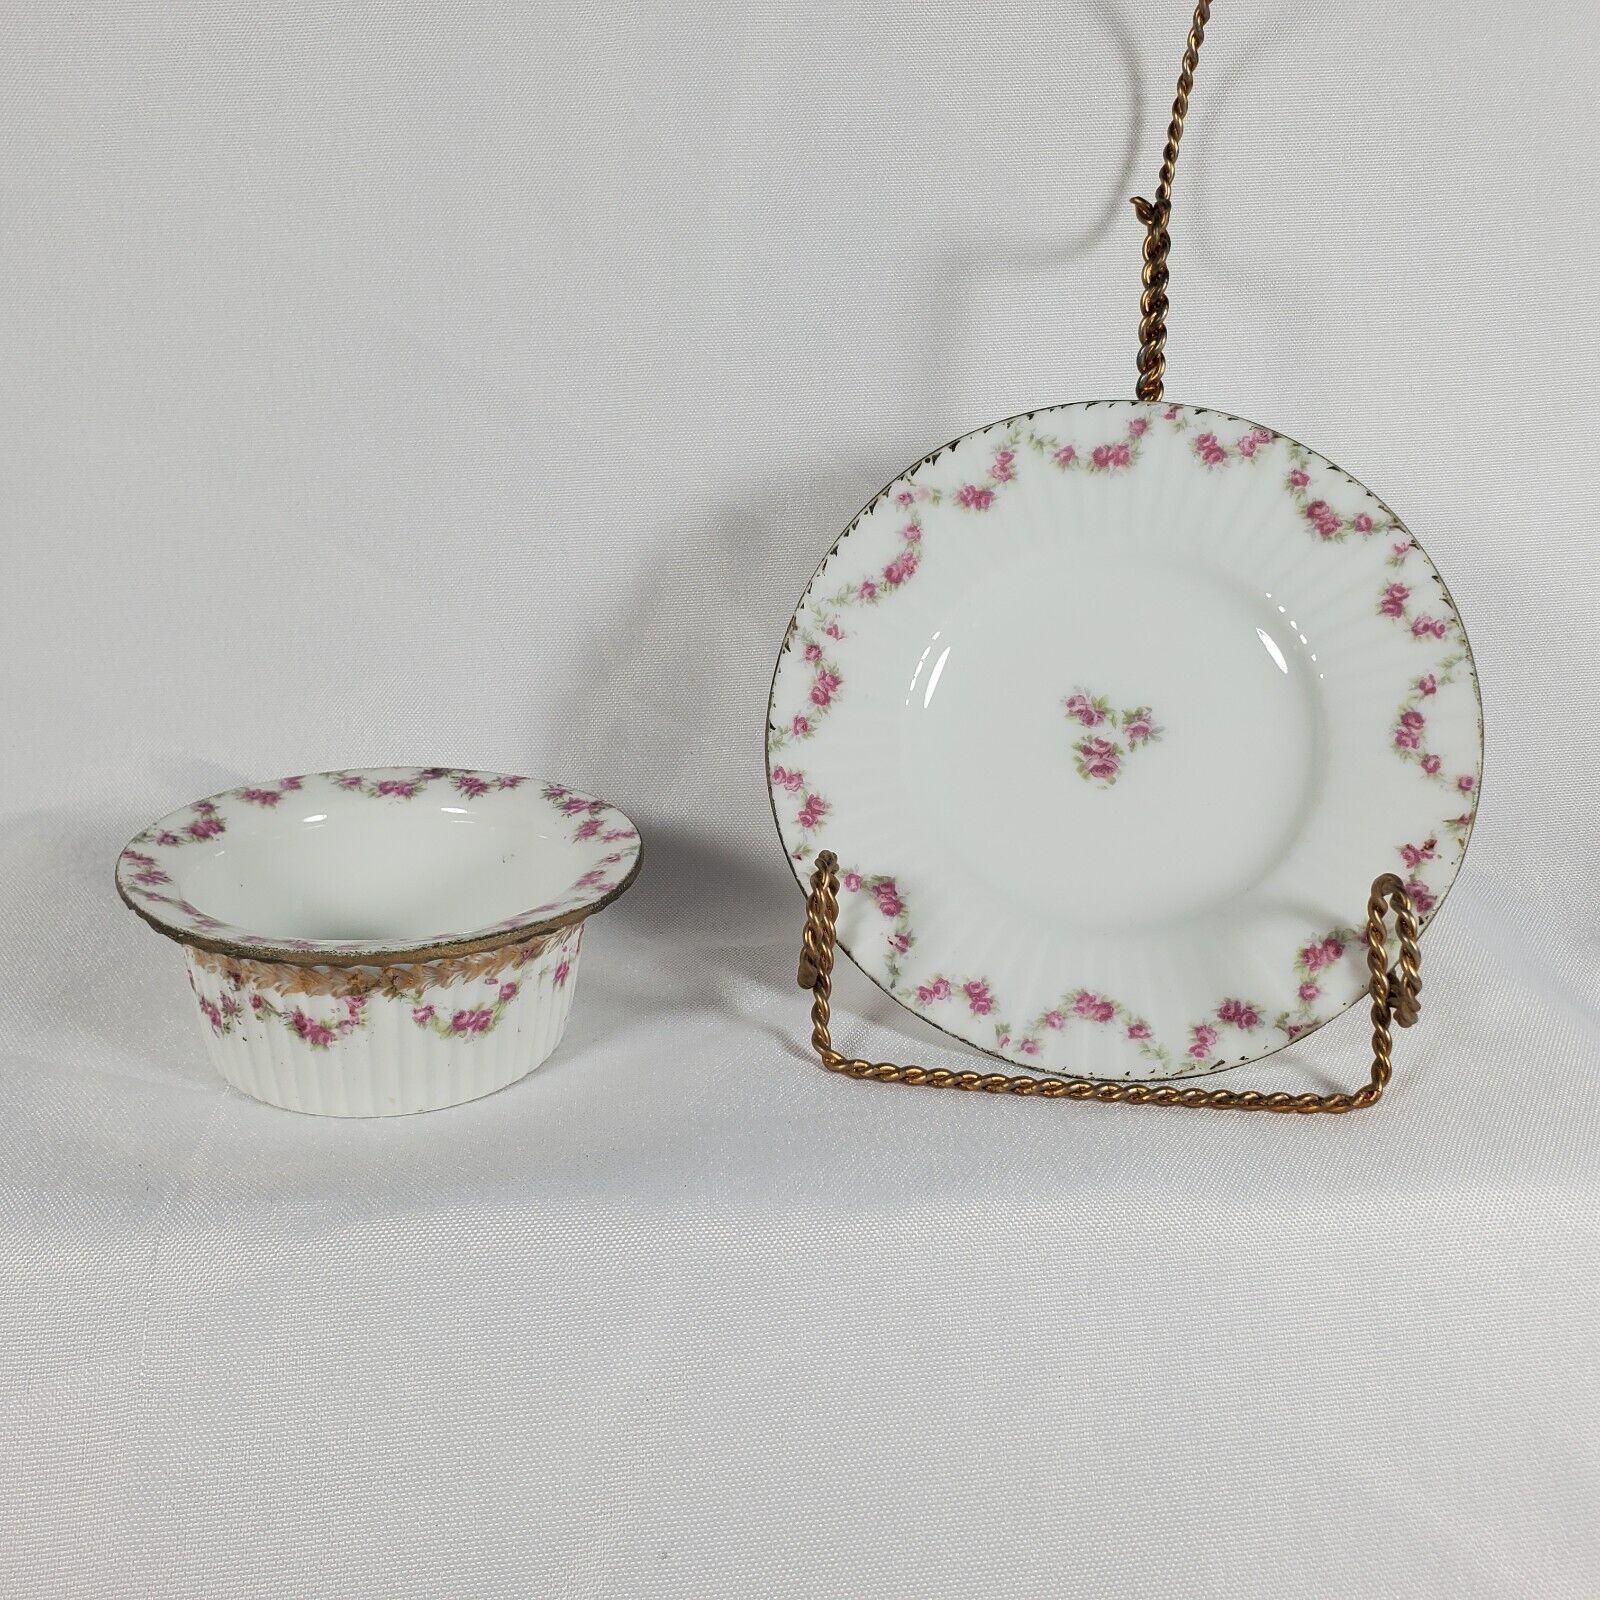 Antique Higgins and Seiter Souffle Creme Brulee Dish and Saucer Pink Flowers